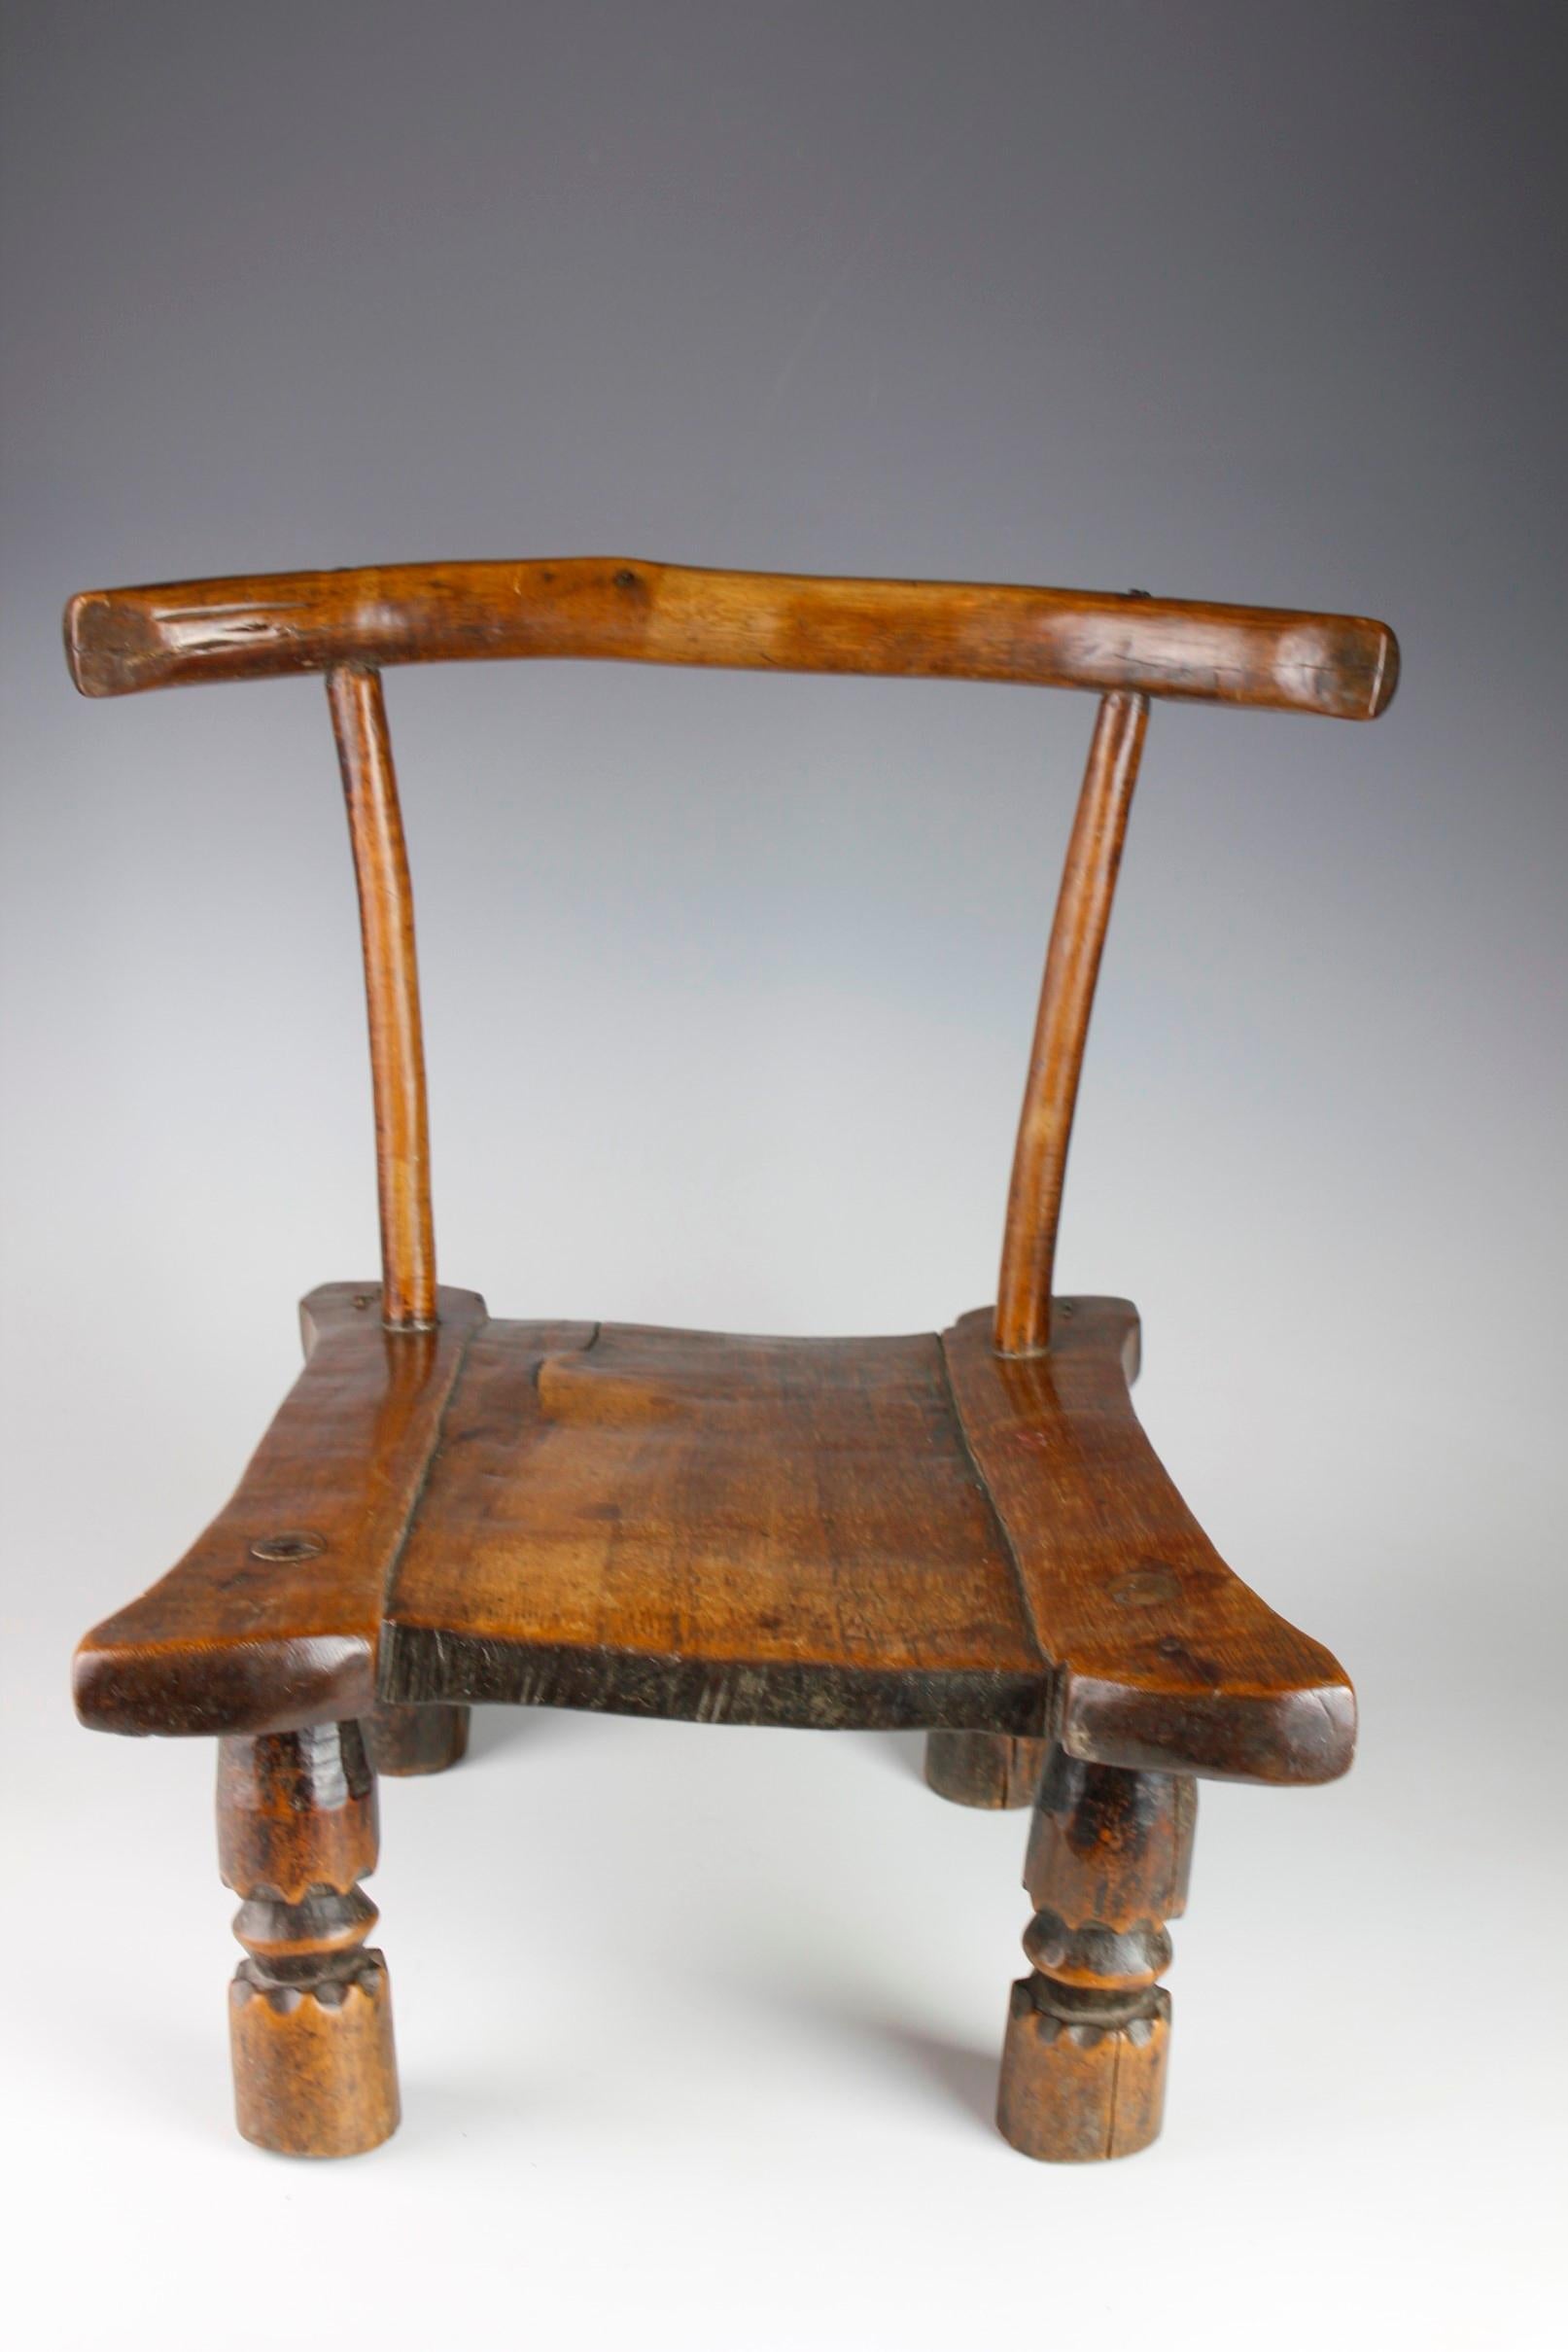 Ivorian Early Twentieth-Century Finely Carved Small Chair  For Sale